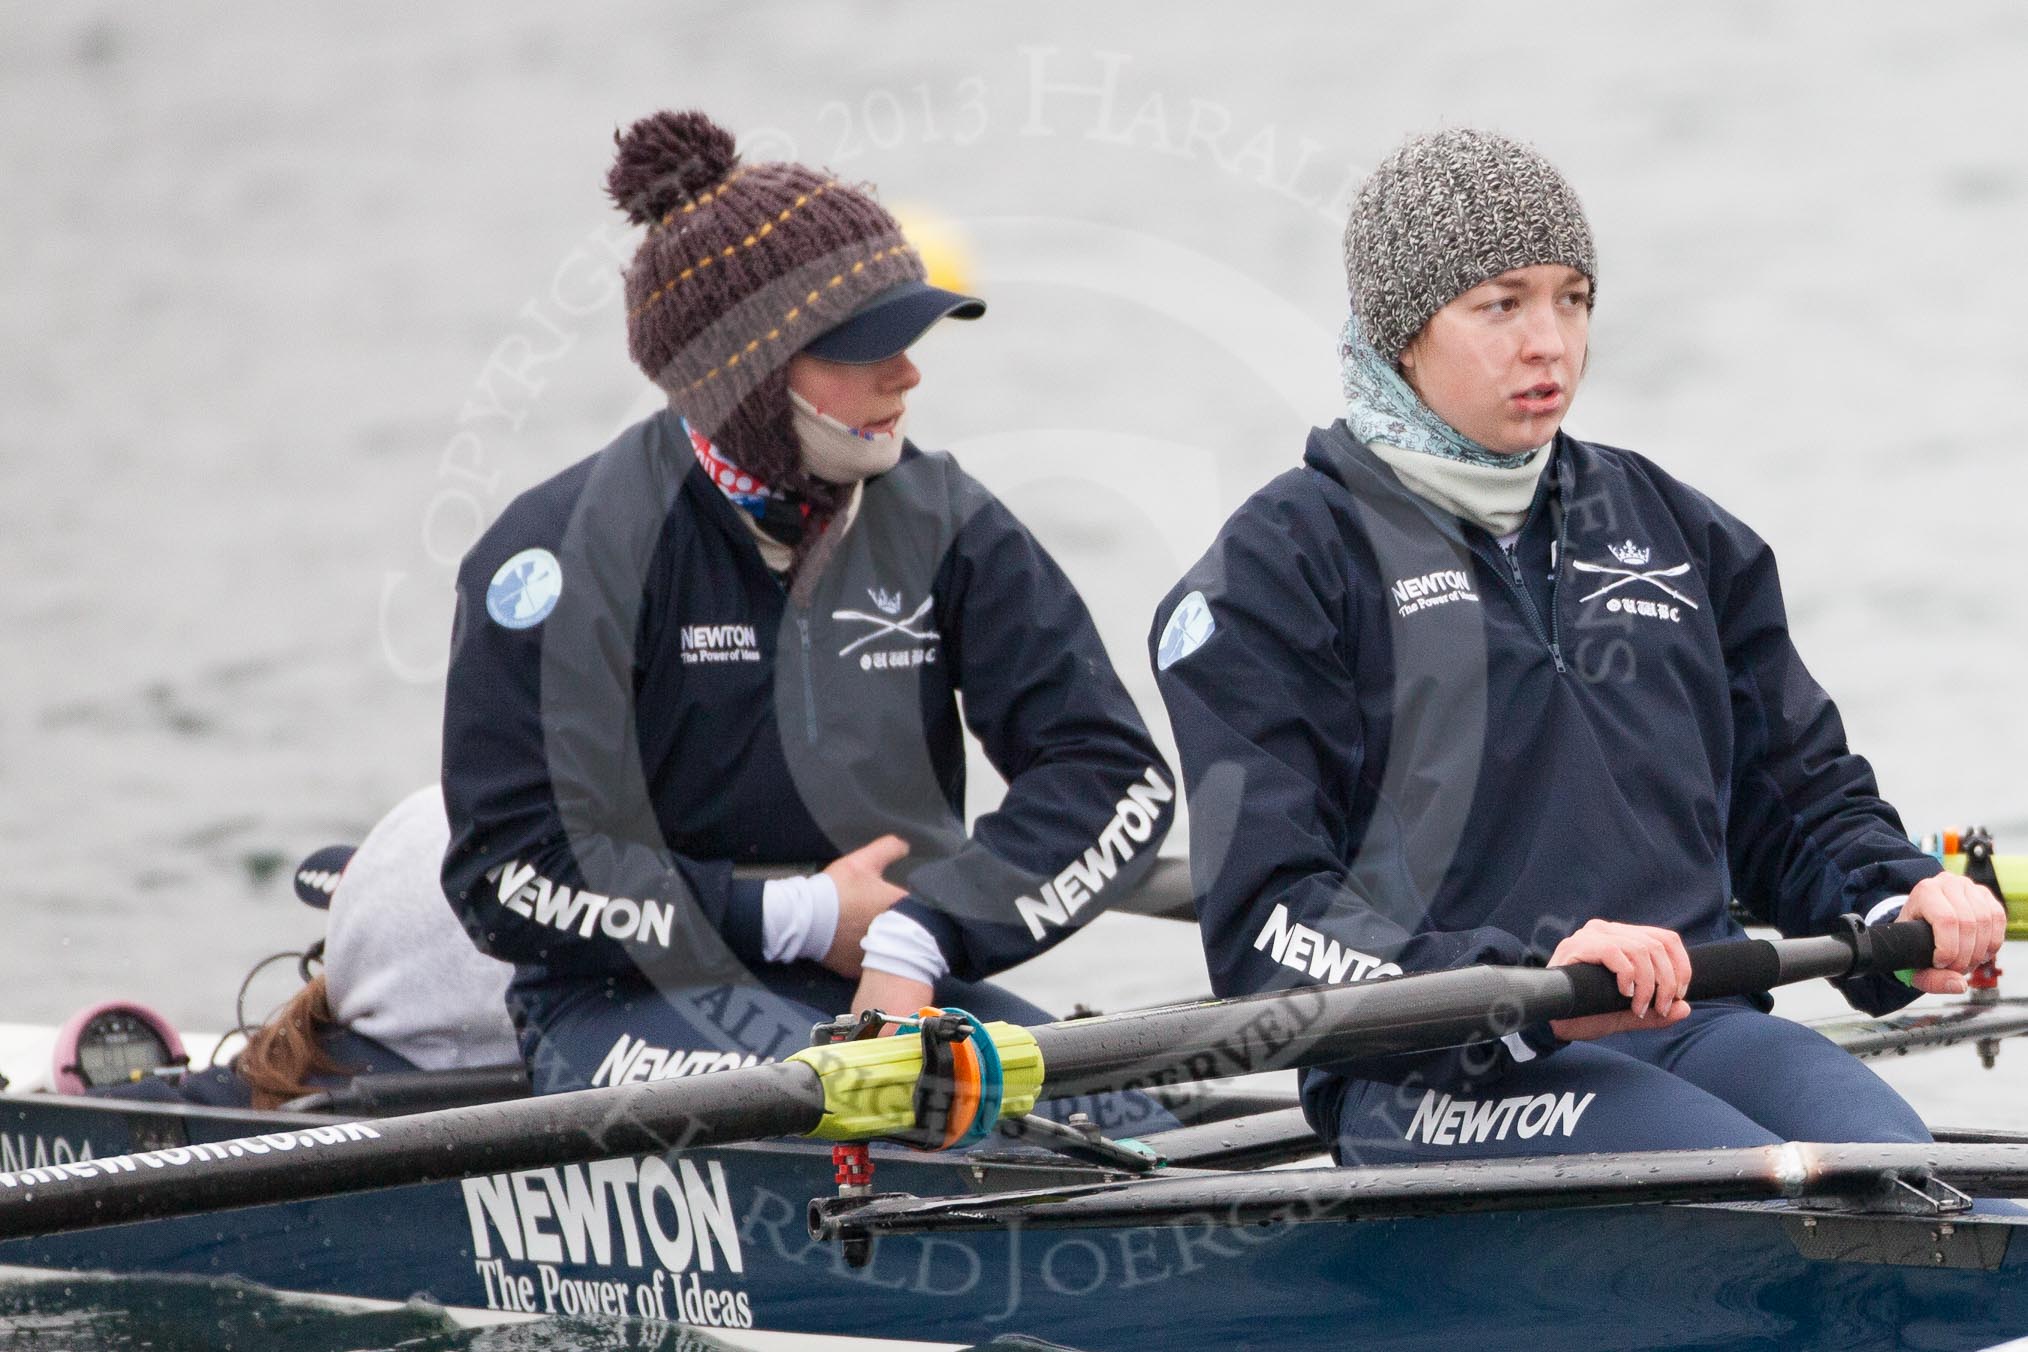 The Boat Race season 2013 - fixture OUWBC vs Molesey BC: OUWBC's cox Olivia Cleary, bow Elspeth Cumber, and Rachel Purkess on a very cold morning at Dorney Lake..
Dorney Lake,
Dorney, Windsor,
Berkshire,
United Kingdom,
on 24 February 2013 at 12:15, image #126